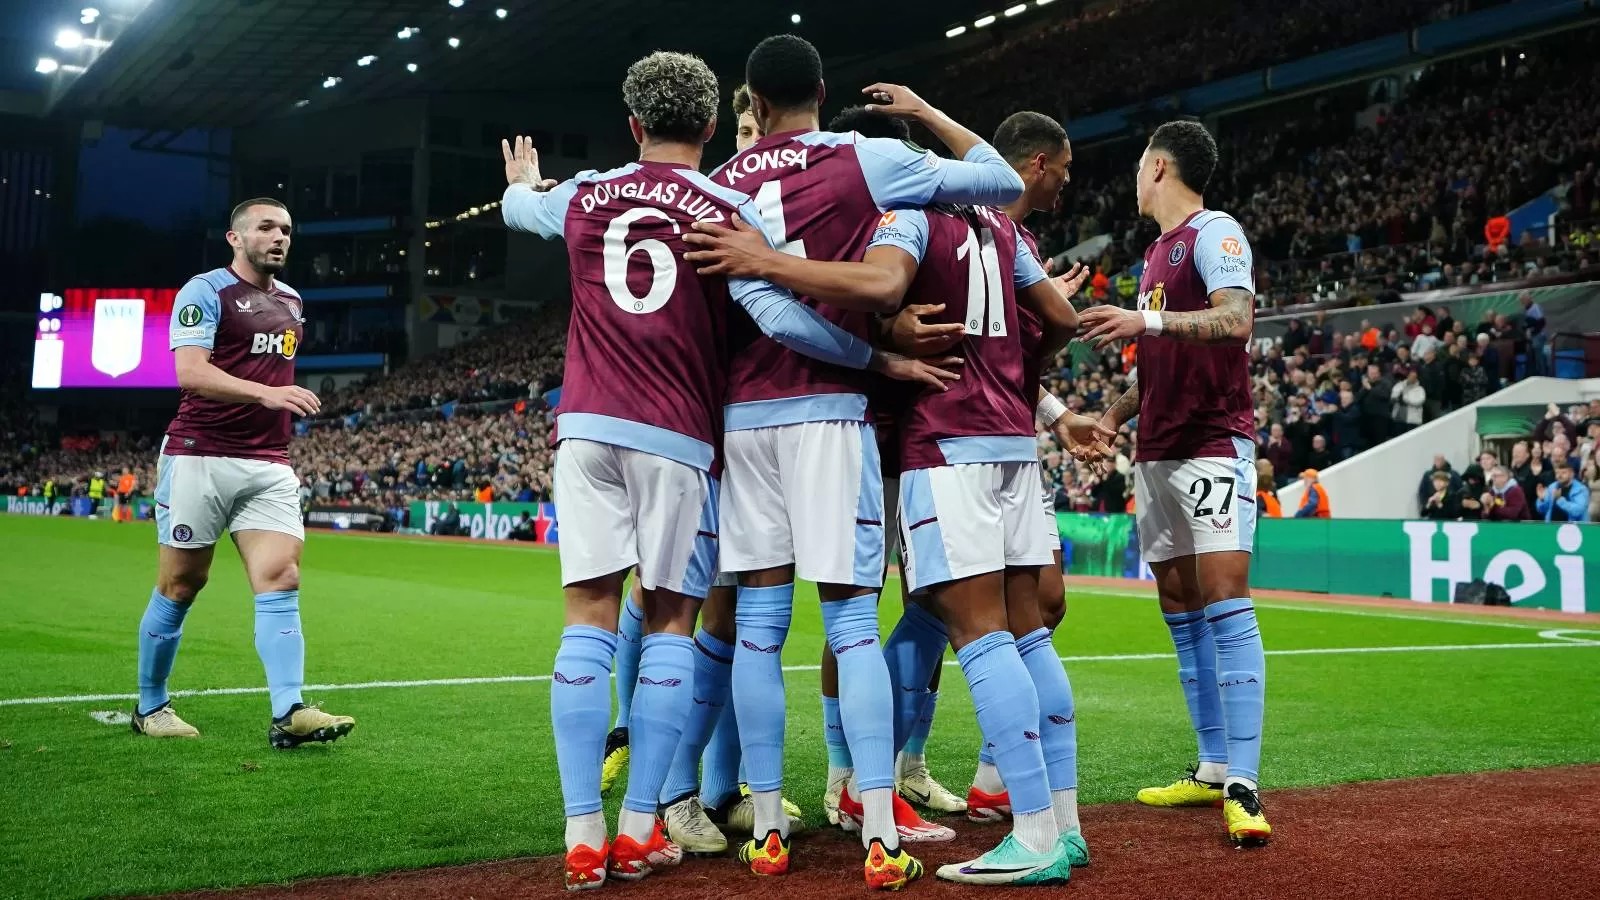 Big-spending Aston Villa need to be less Newcastle United and more Tottenham